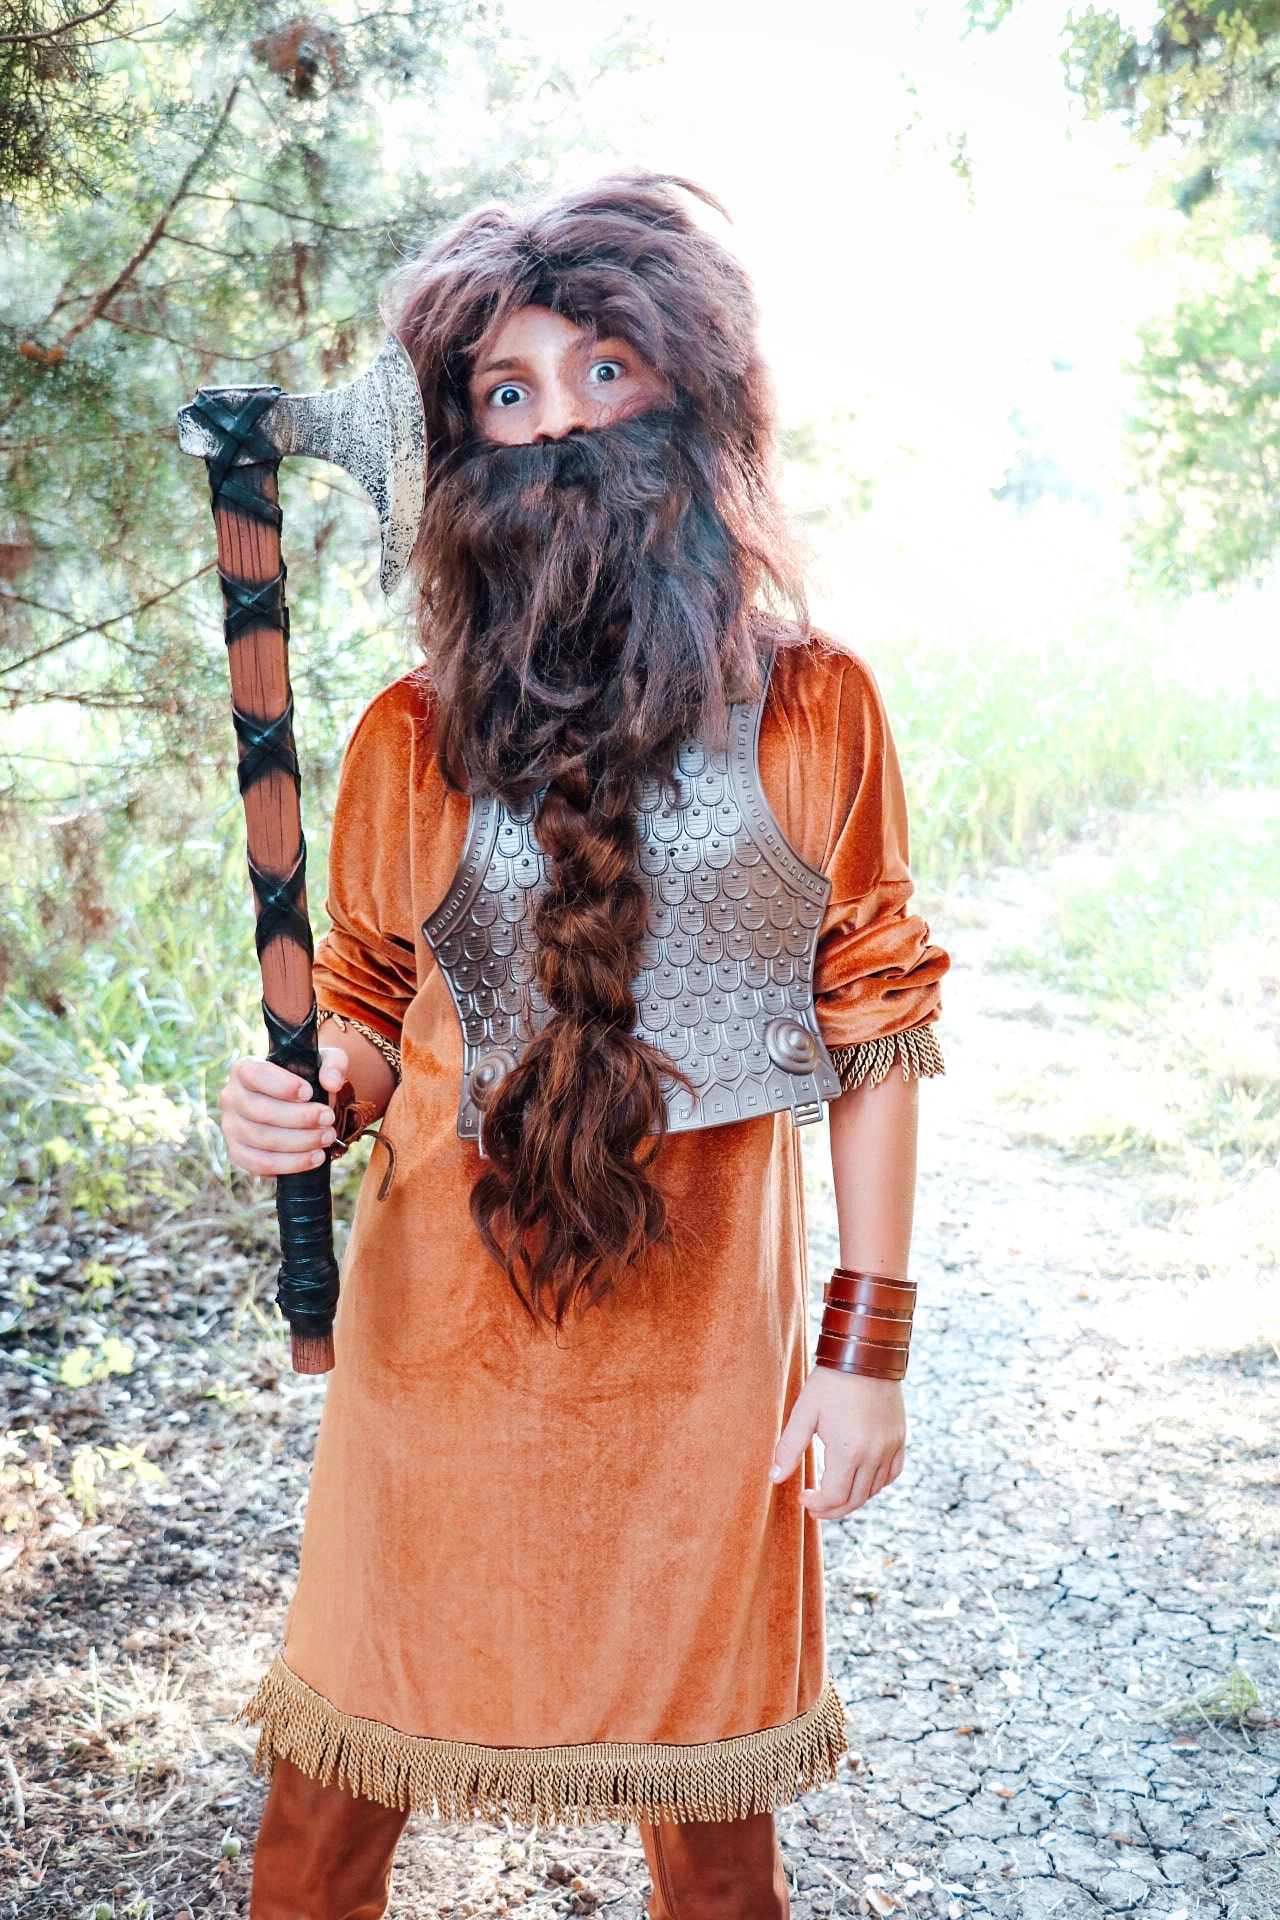 Lord of the Rings costumes: Rings of Power Durin DIY dwarf costume